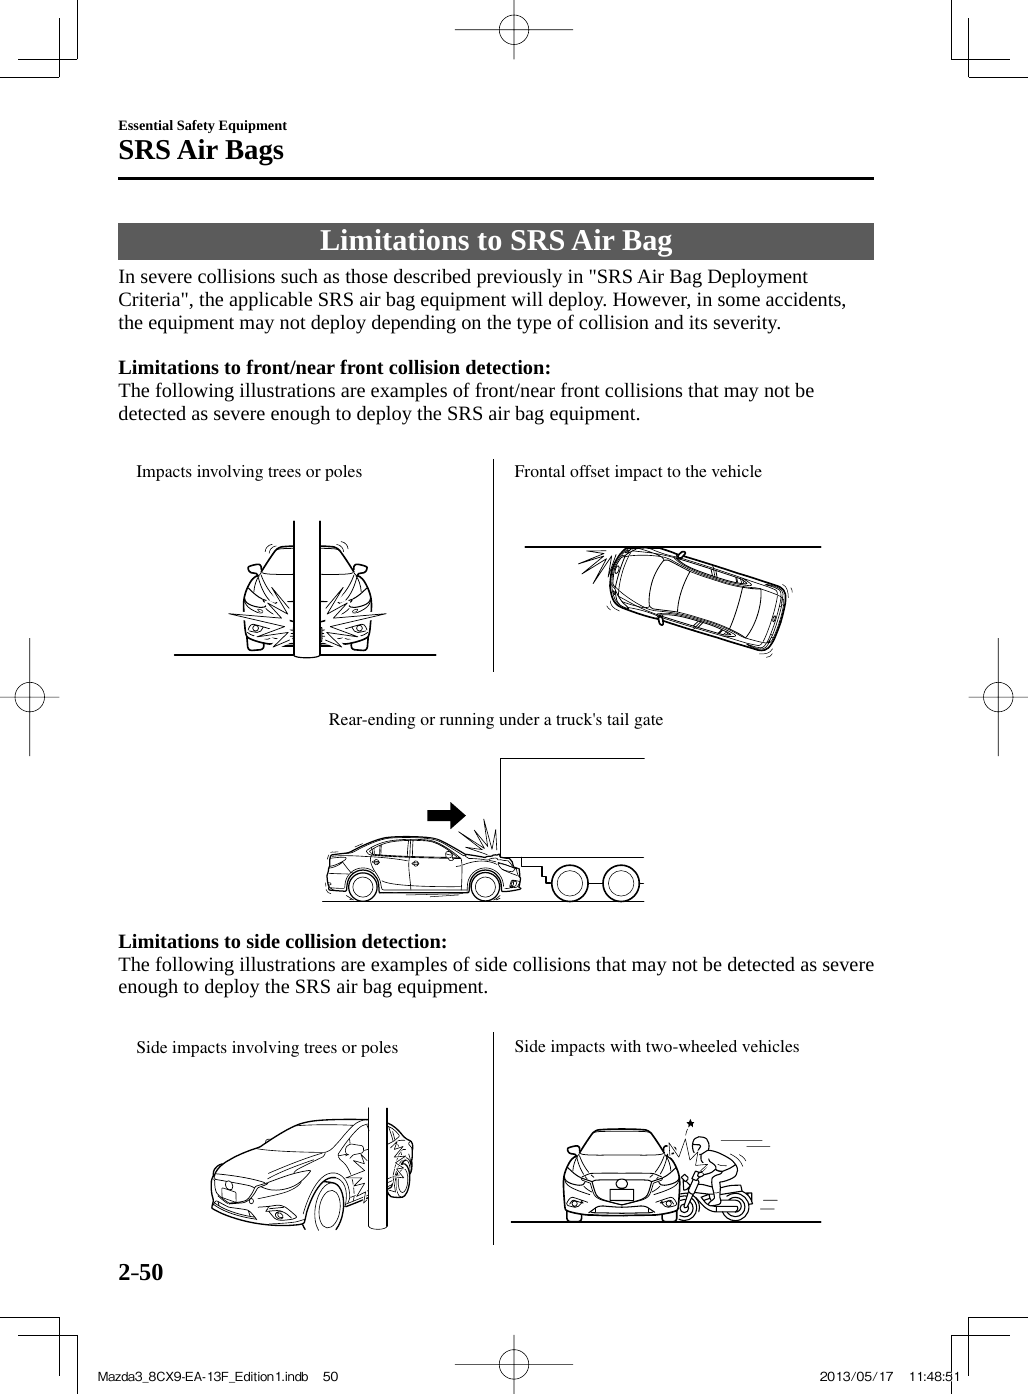 2–50Essential Safety EquipmentSRS Air Bags Limitations to SRS Air Bag            In  severe  collisions  such  as  those  described  previously  in  &quot;SRS  Air  Bag  Deployment Criteria&quot;, the applicable SRS air bag equipment will deploy. However, in some accidents, the equipment may not deploy depending on the type of collision and its severity.     Limitations to front/near front collision detection:   The following illustrations are examples of front/near front collisions that may not be detected as severe enough to deploy the SRS air bag equipment.   Impacts involving trees or poles Frontal offset impact to the vehicle    Rear-ending or running under a truck&apos;s tail gate    Limitations to side collision detection:   The following illustrations are examples of side collisions that may not be detected as severe enough to deploy the SRS air bag equipment.   Side impacts involving trees or poles Side impacts with two-wheeled vehicles Mazda3_8CX9-EA-13F_Edition1.indb   50Mazda3_8CX9-EA-13F_Edition1.indb   50 2013/05/17   11:48:512013/05/17   11:48:51